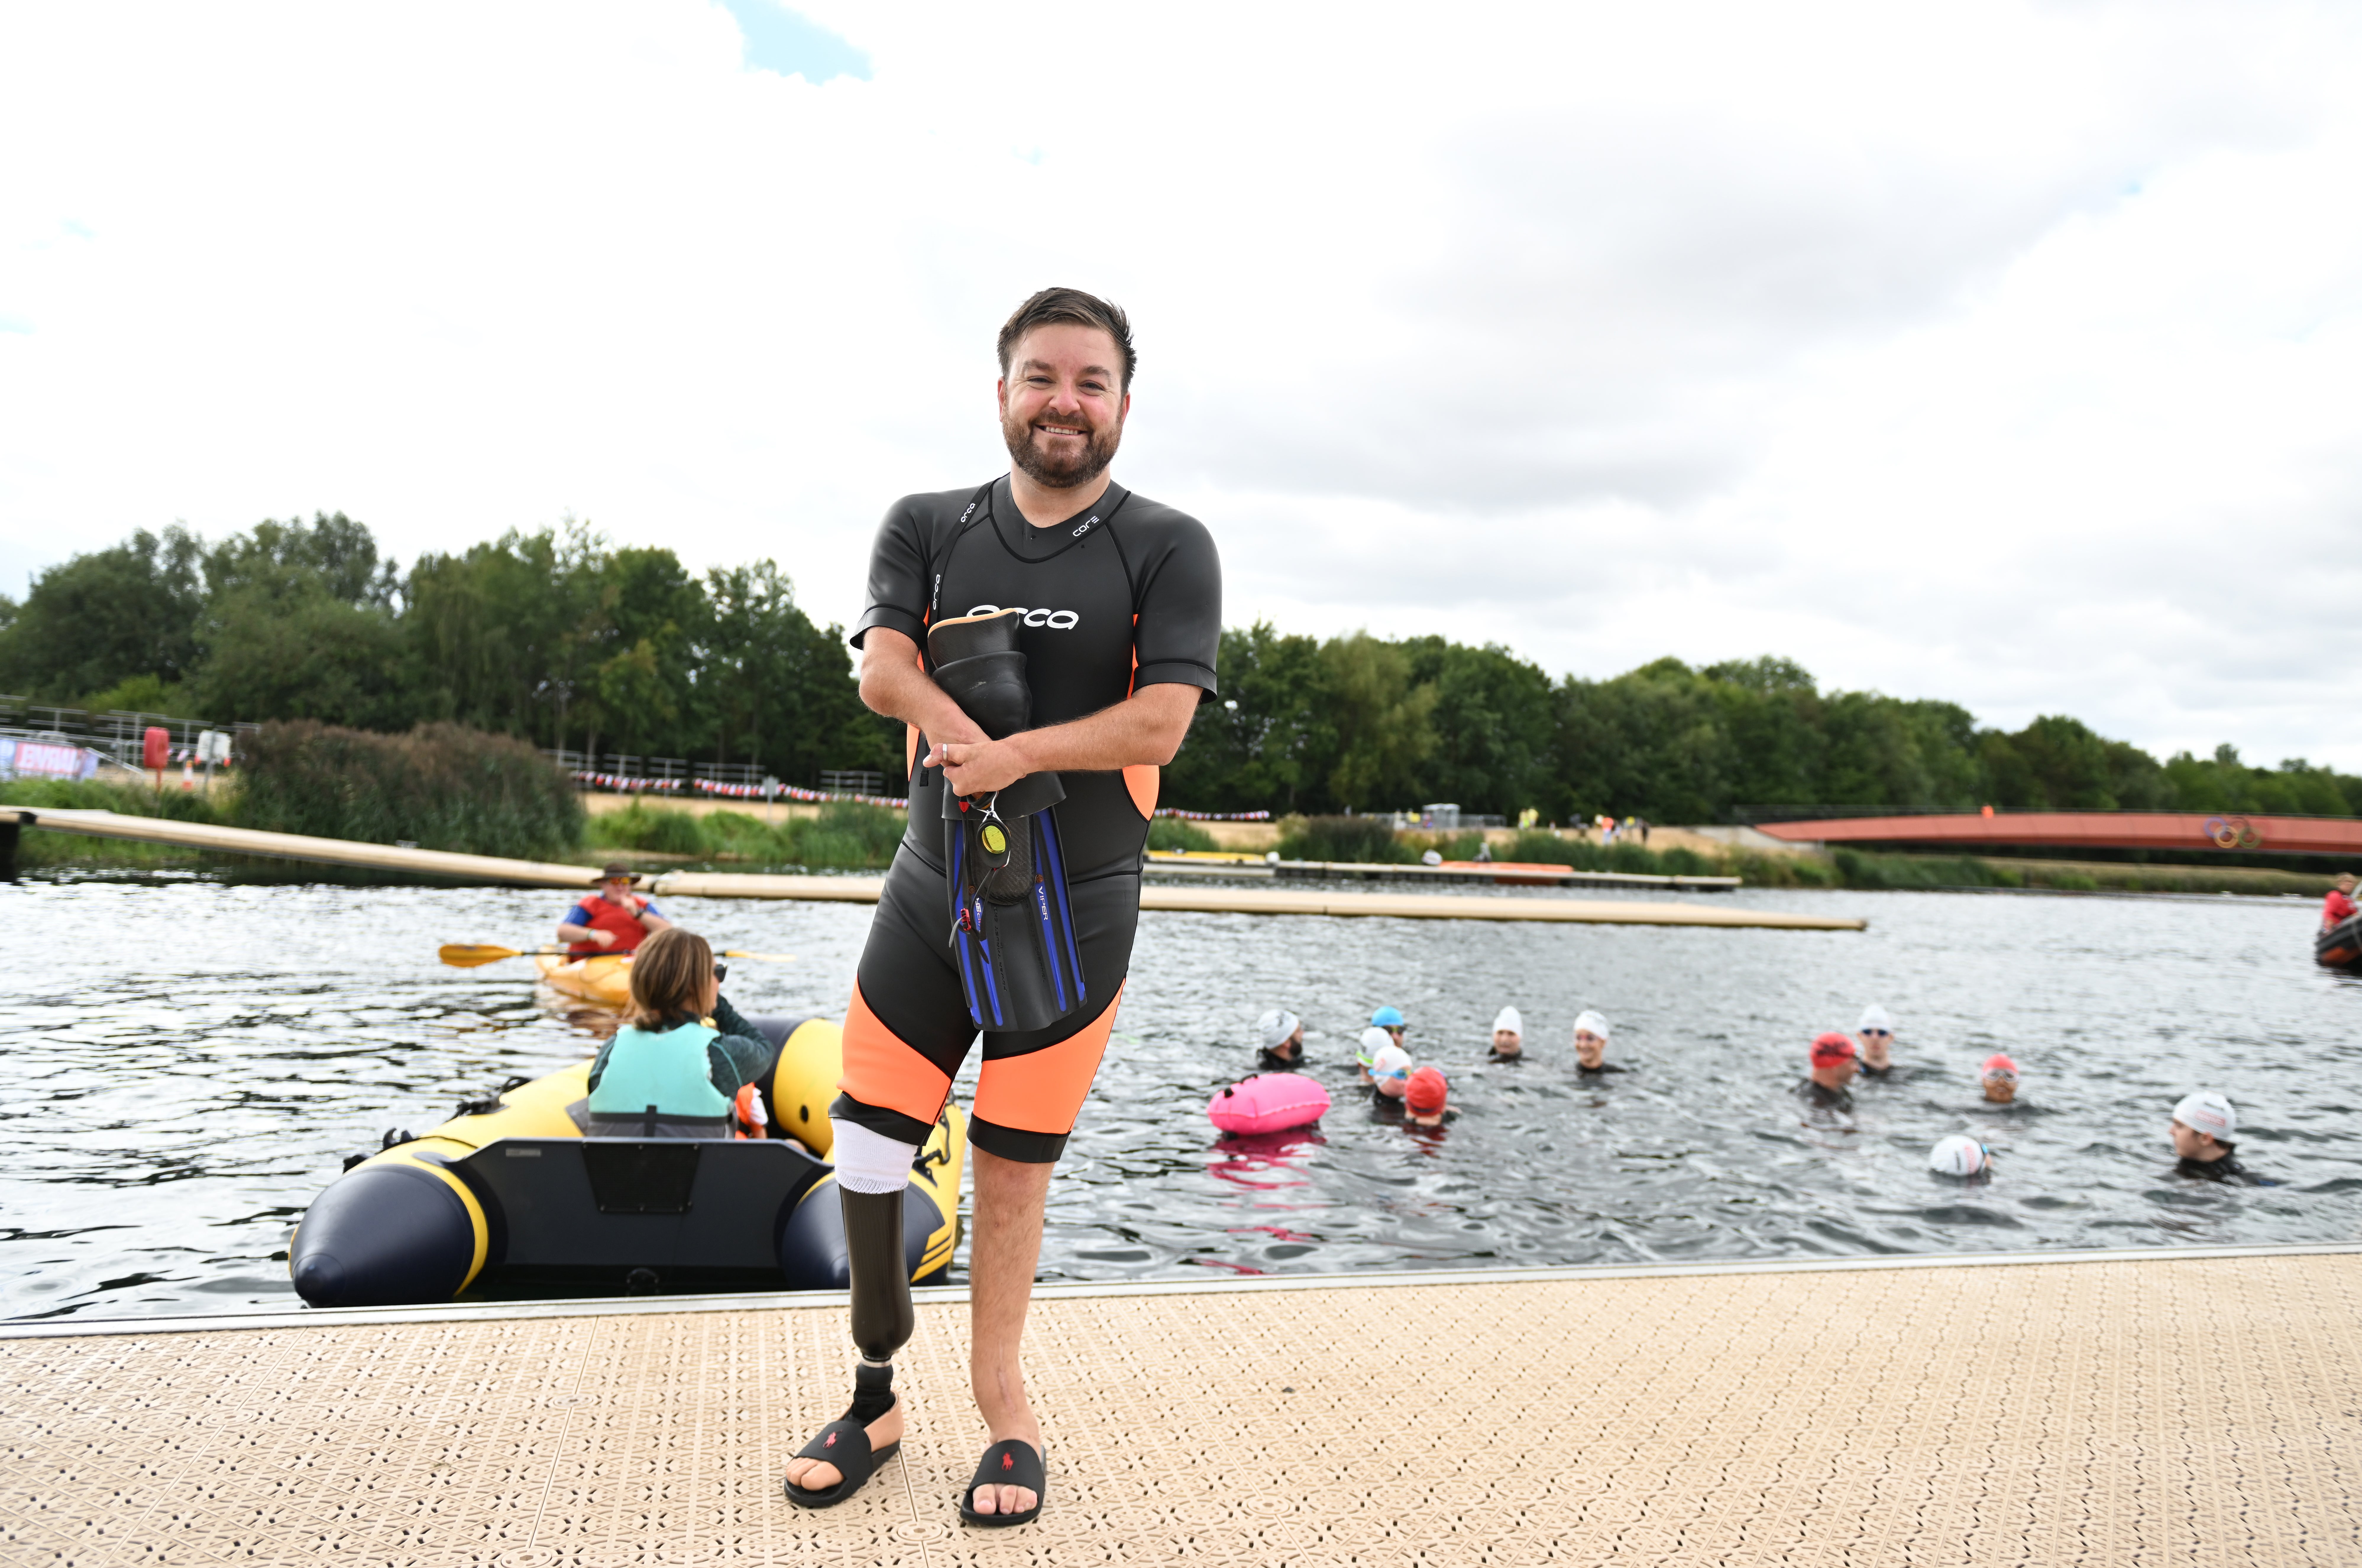 Alex Brooker participating in the sporting event (Superhero Series, powered by Marvel/PA)